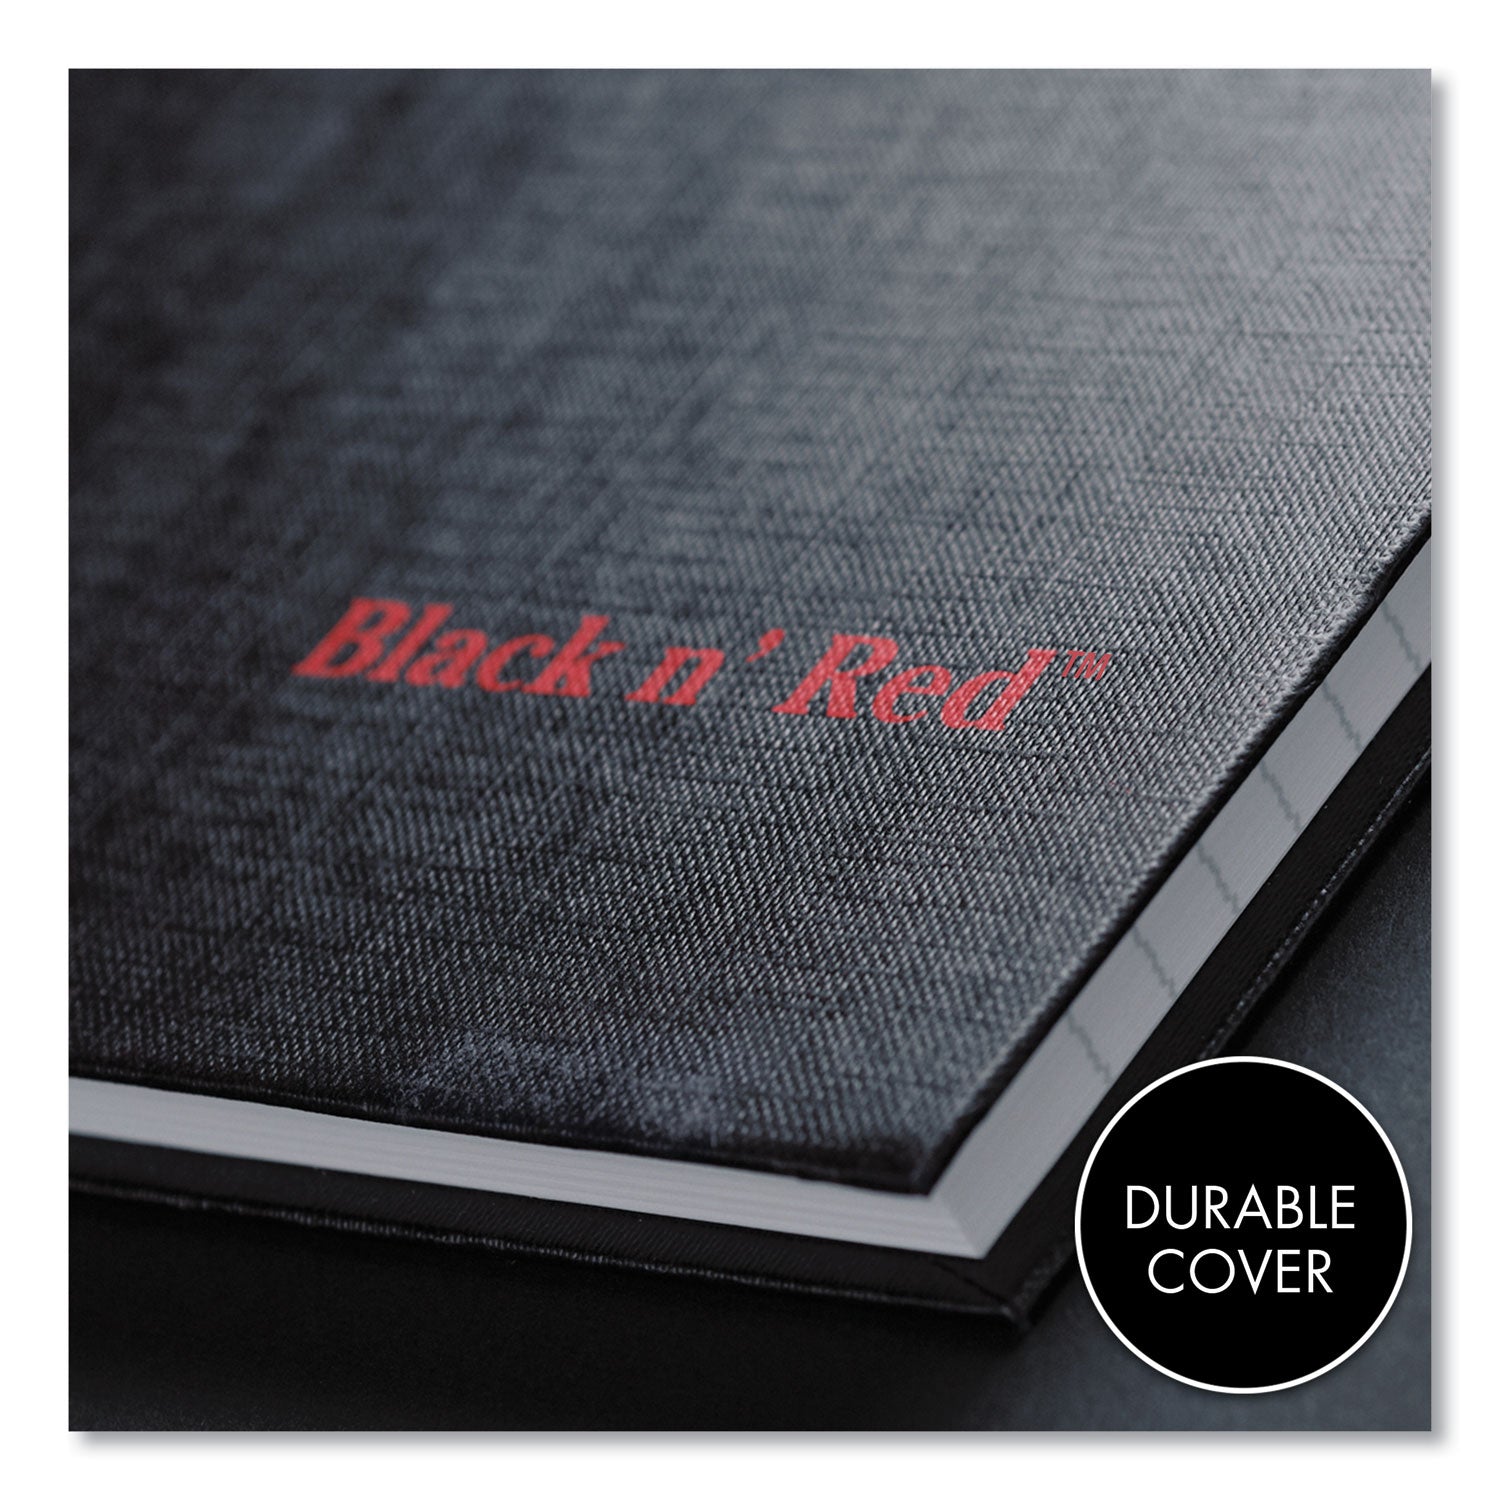 hardcover-casebound-notebooks-scribzee-compatible-1-subject-wide-legal-rule-black-cover-96-975-x-675-sheets_jdk400110531 - 6